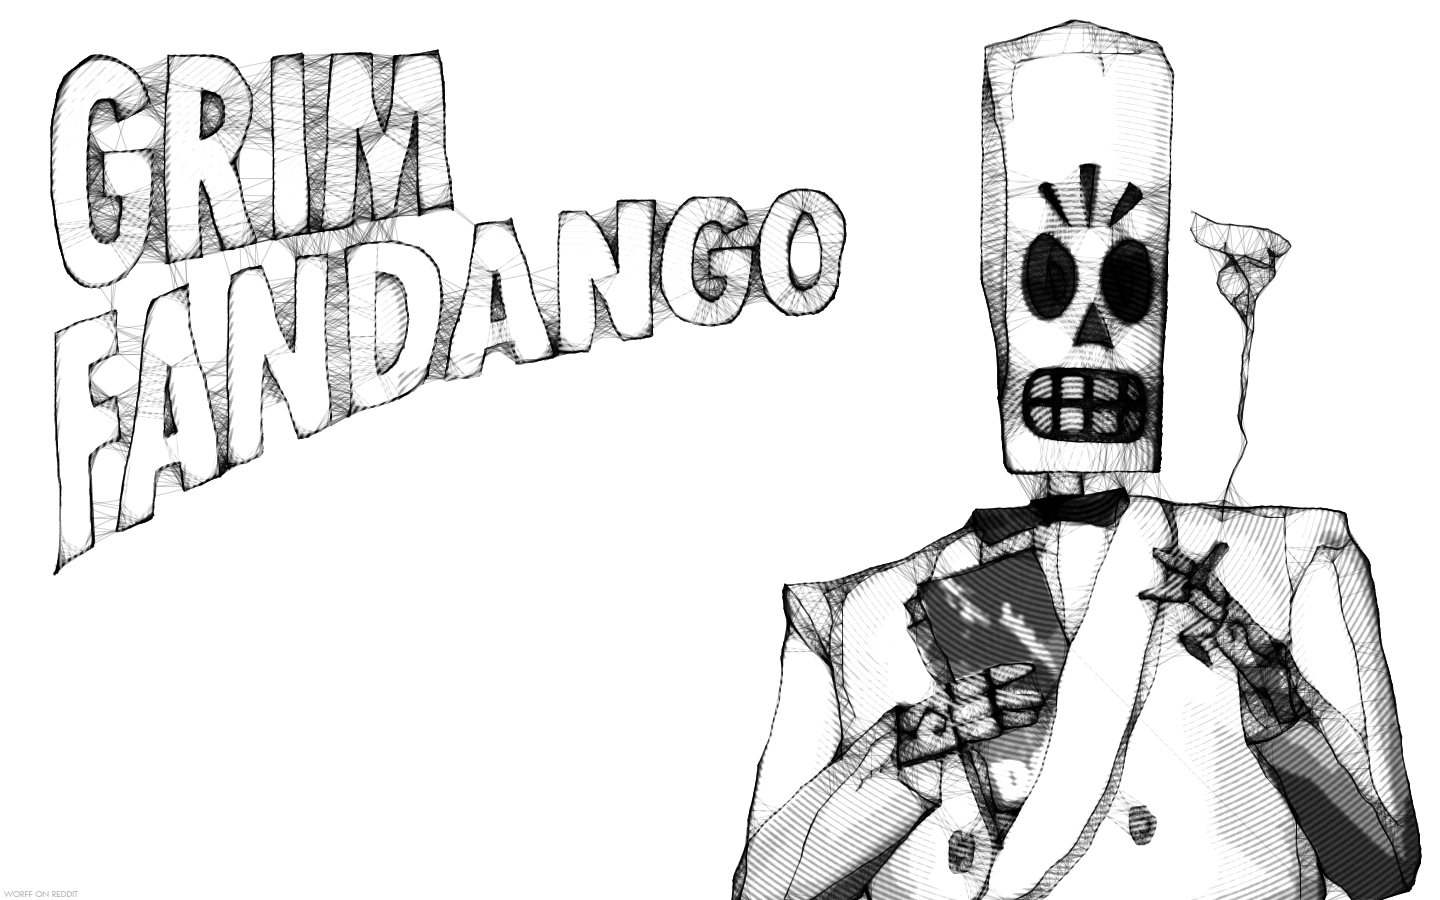 I had Grim Fandango on the mind. So I made this wallpaper